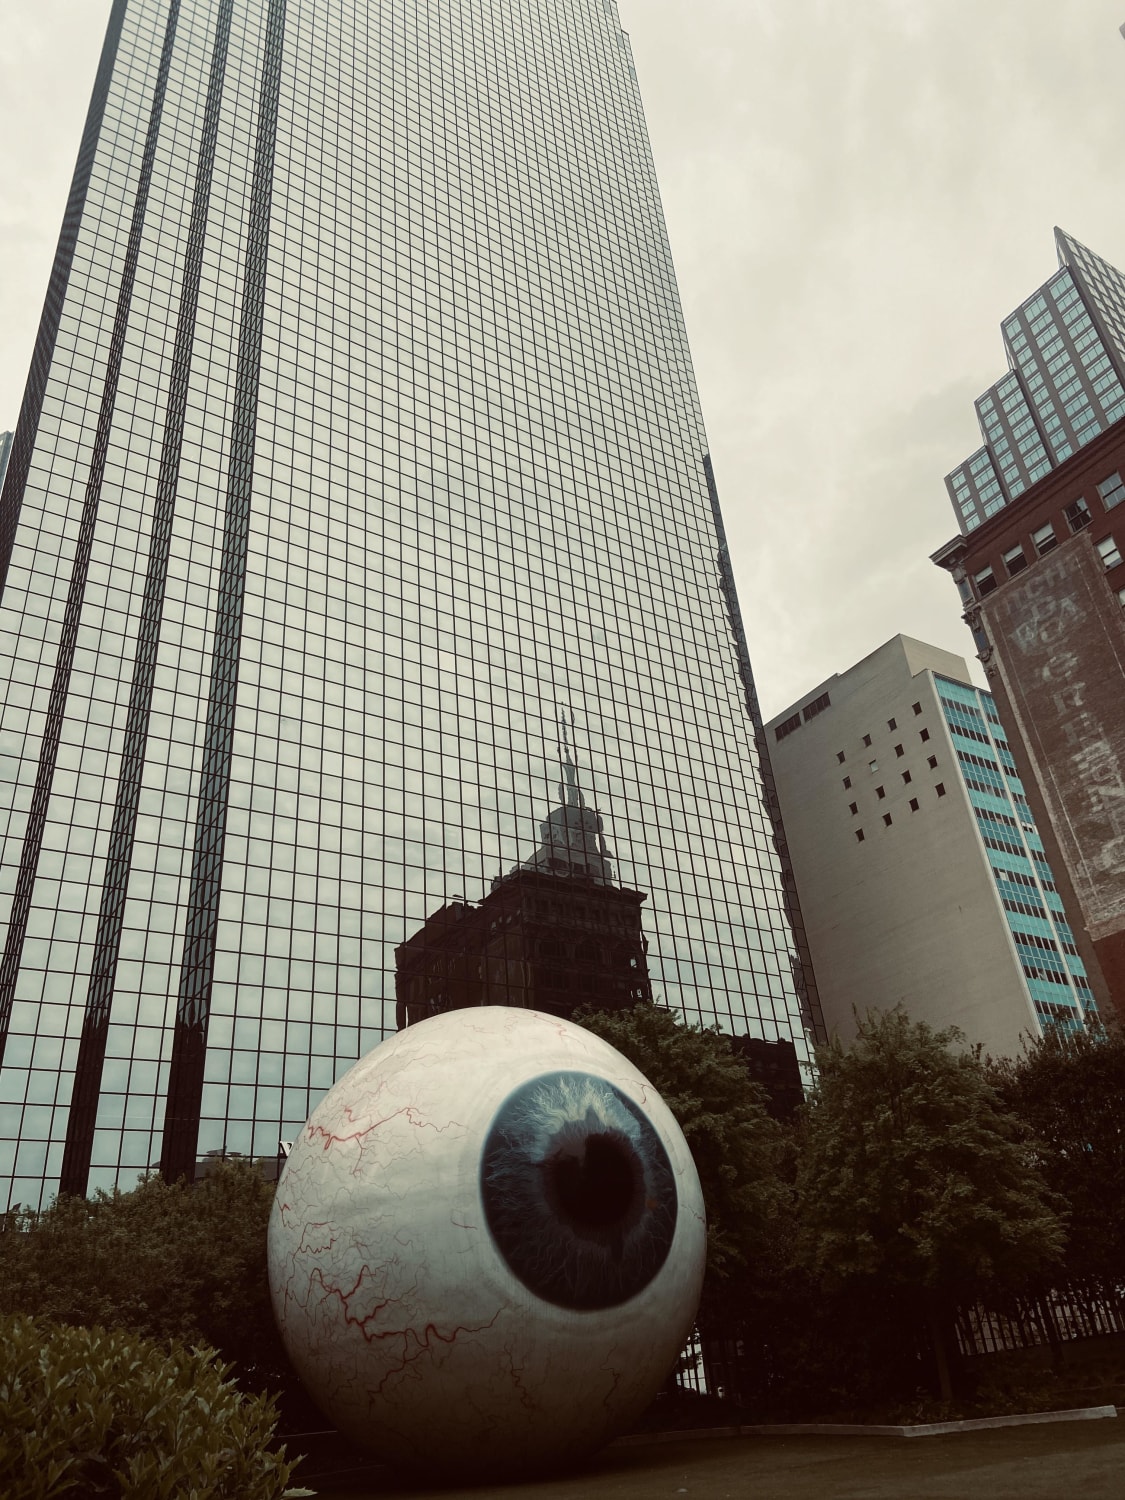 This giant friggin eye in downtown Dallas is hard to walk by without feeling a little nauseous